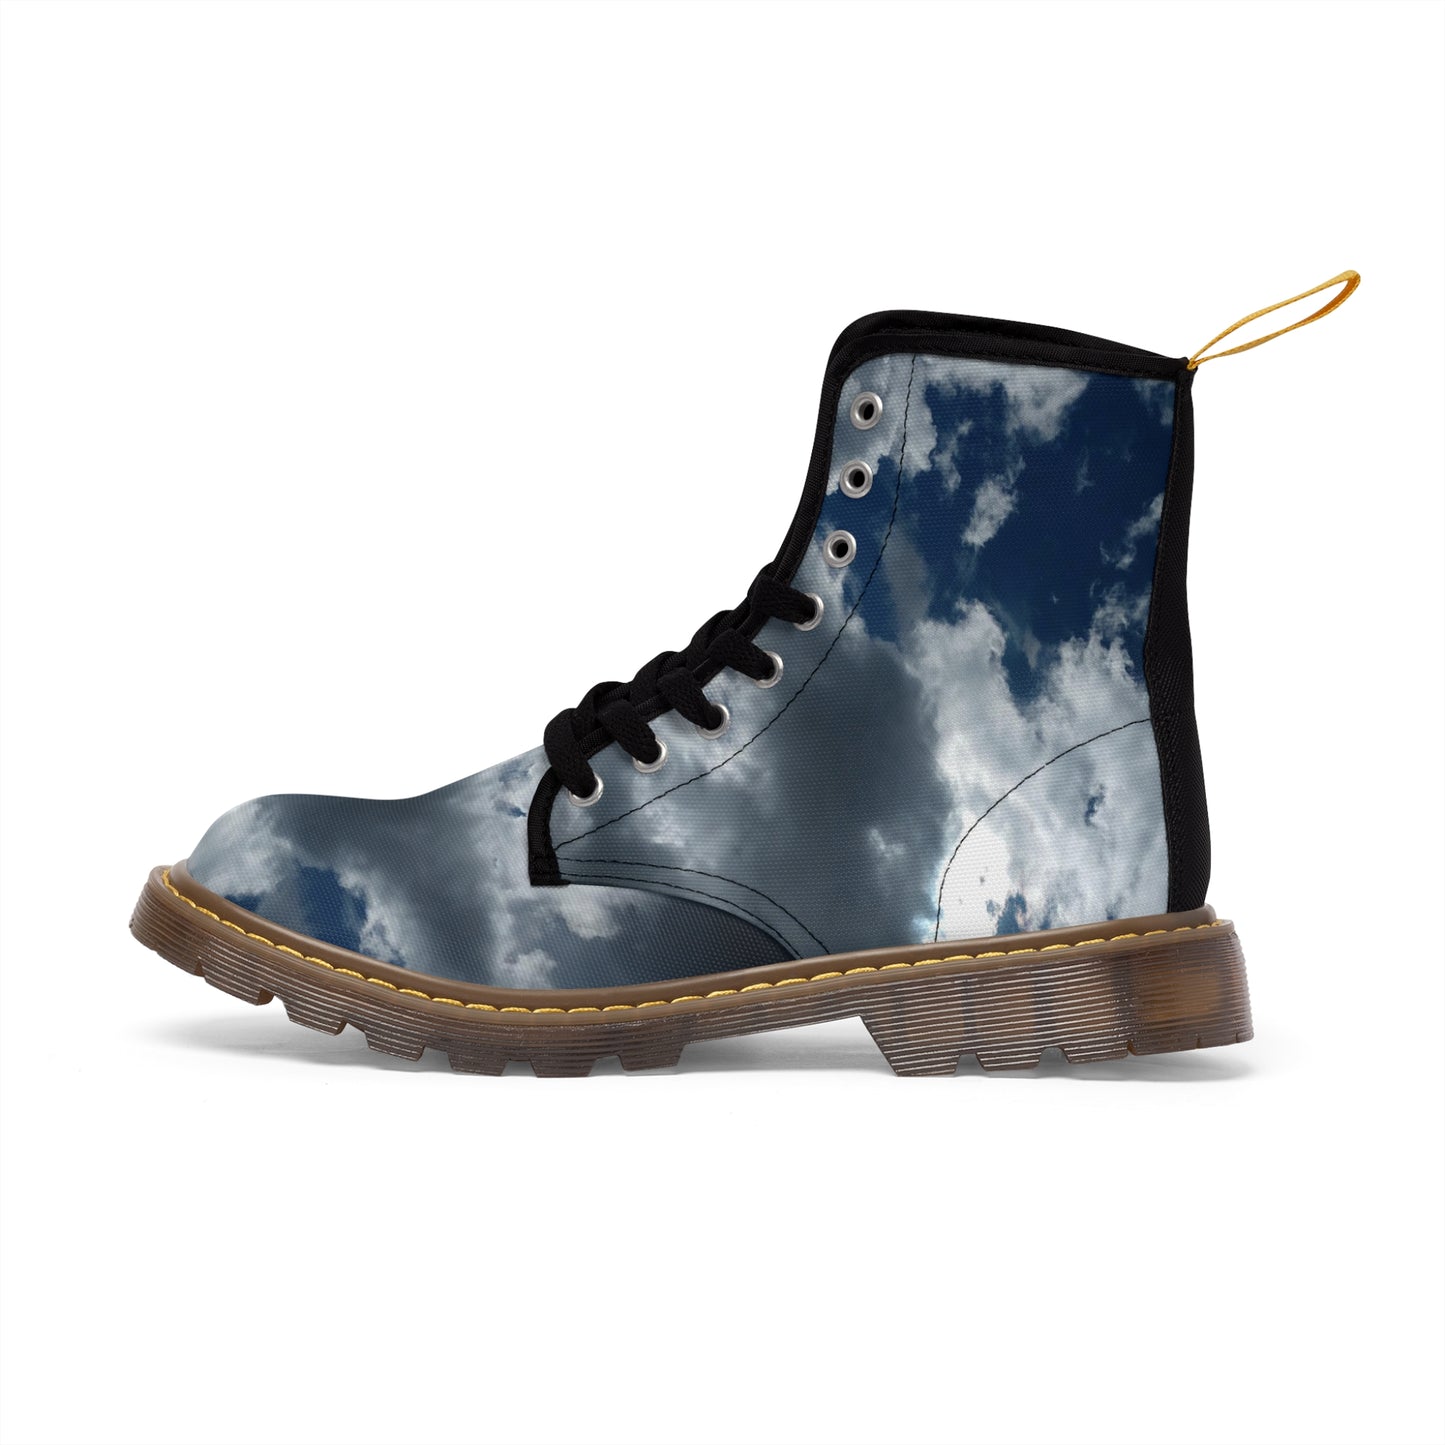 Men's Canvas Boots  "Clear to Partly Cloudy"